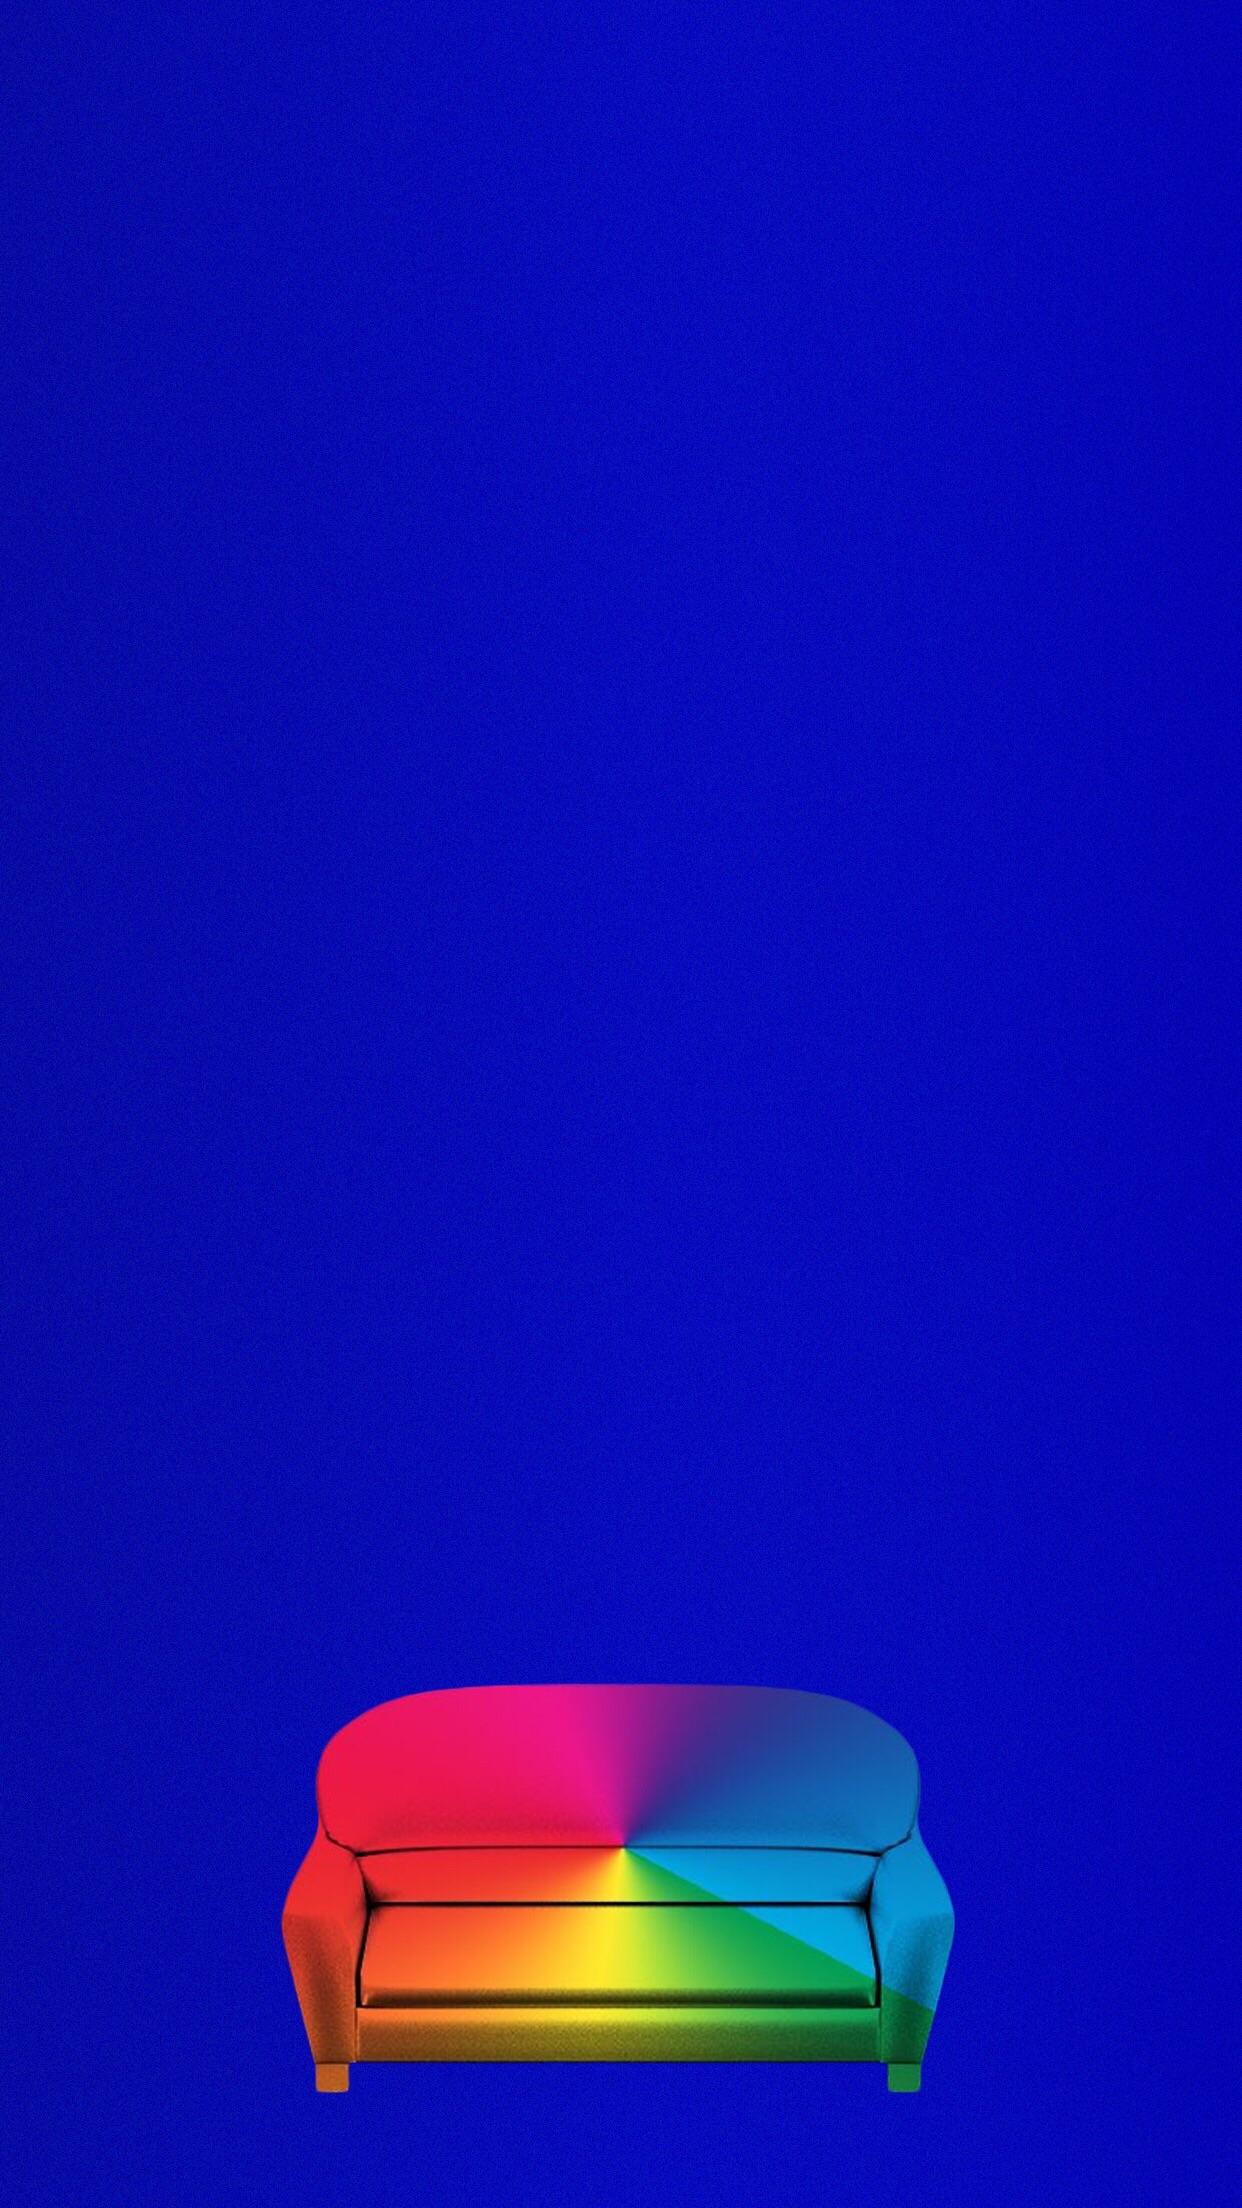 Mad a simple phone wallpaper